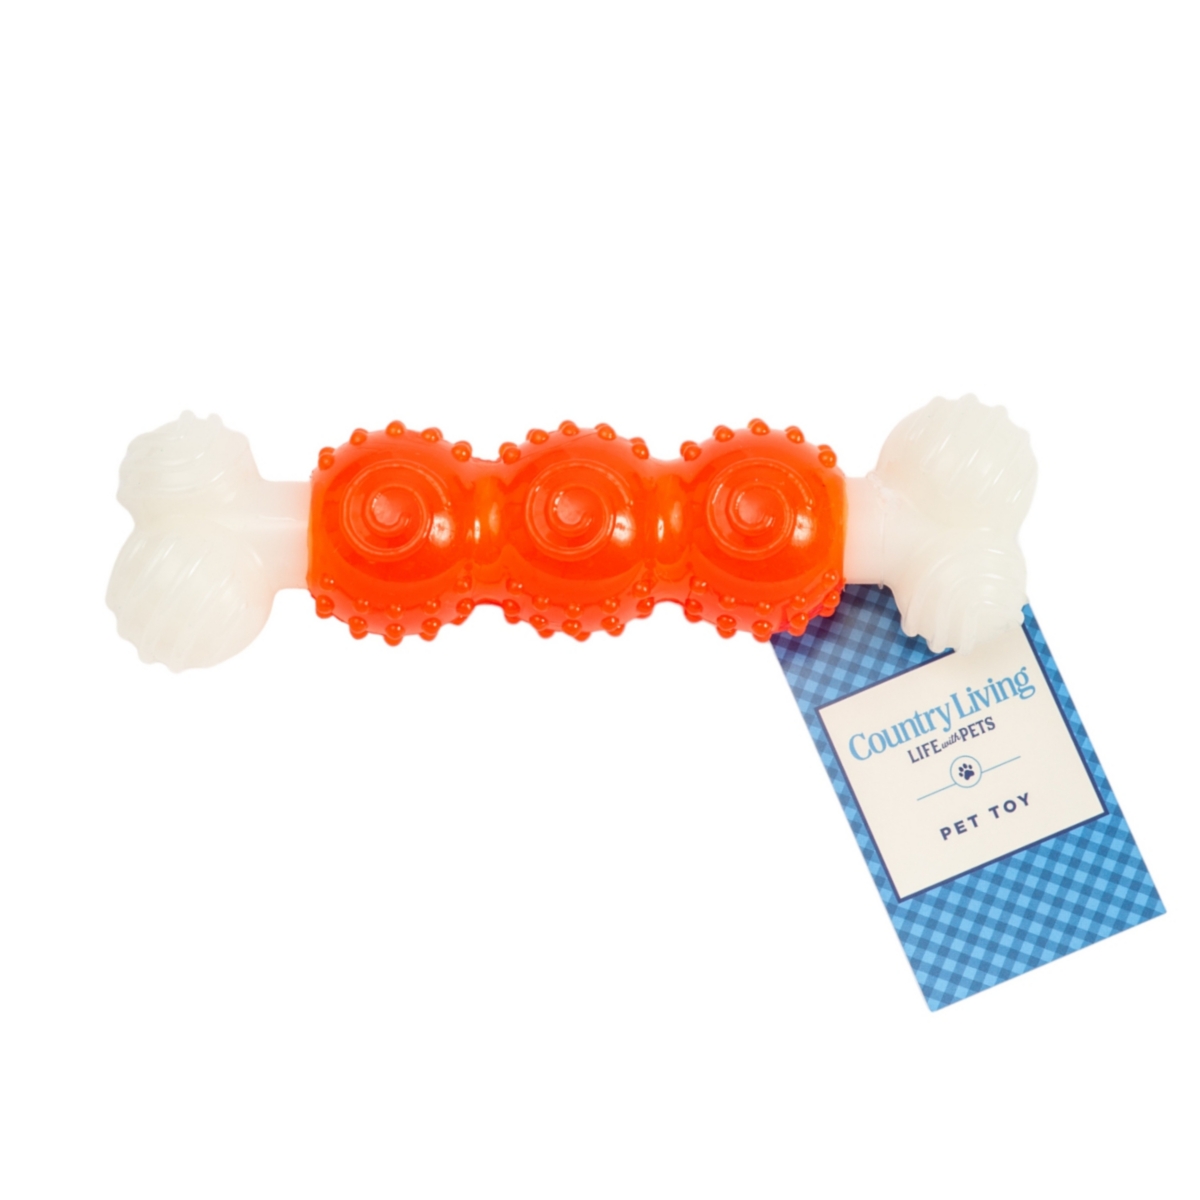 Country Living Life with Pets Durable Tpr Nylon Dog Bone Chew Toy, Orange - Ideal for Puppies and Adult Dogs - Orange